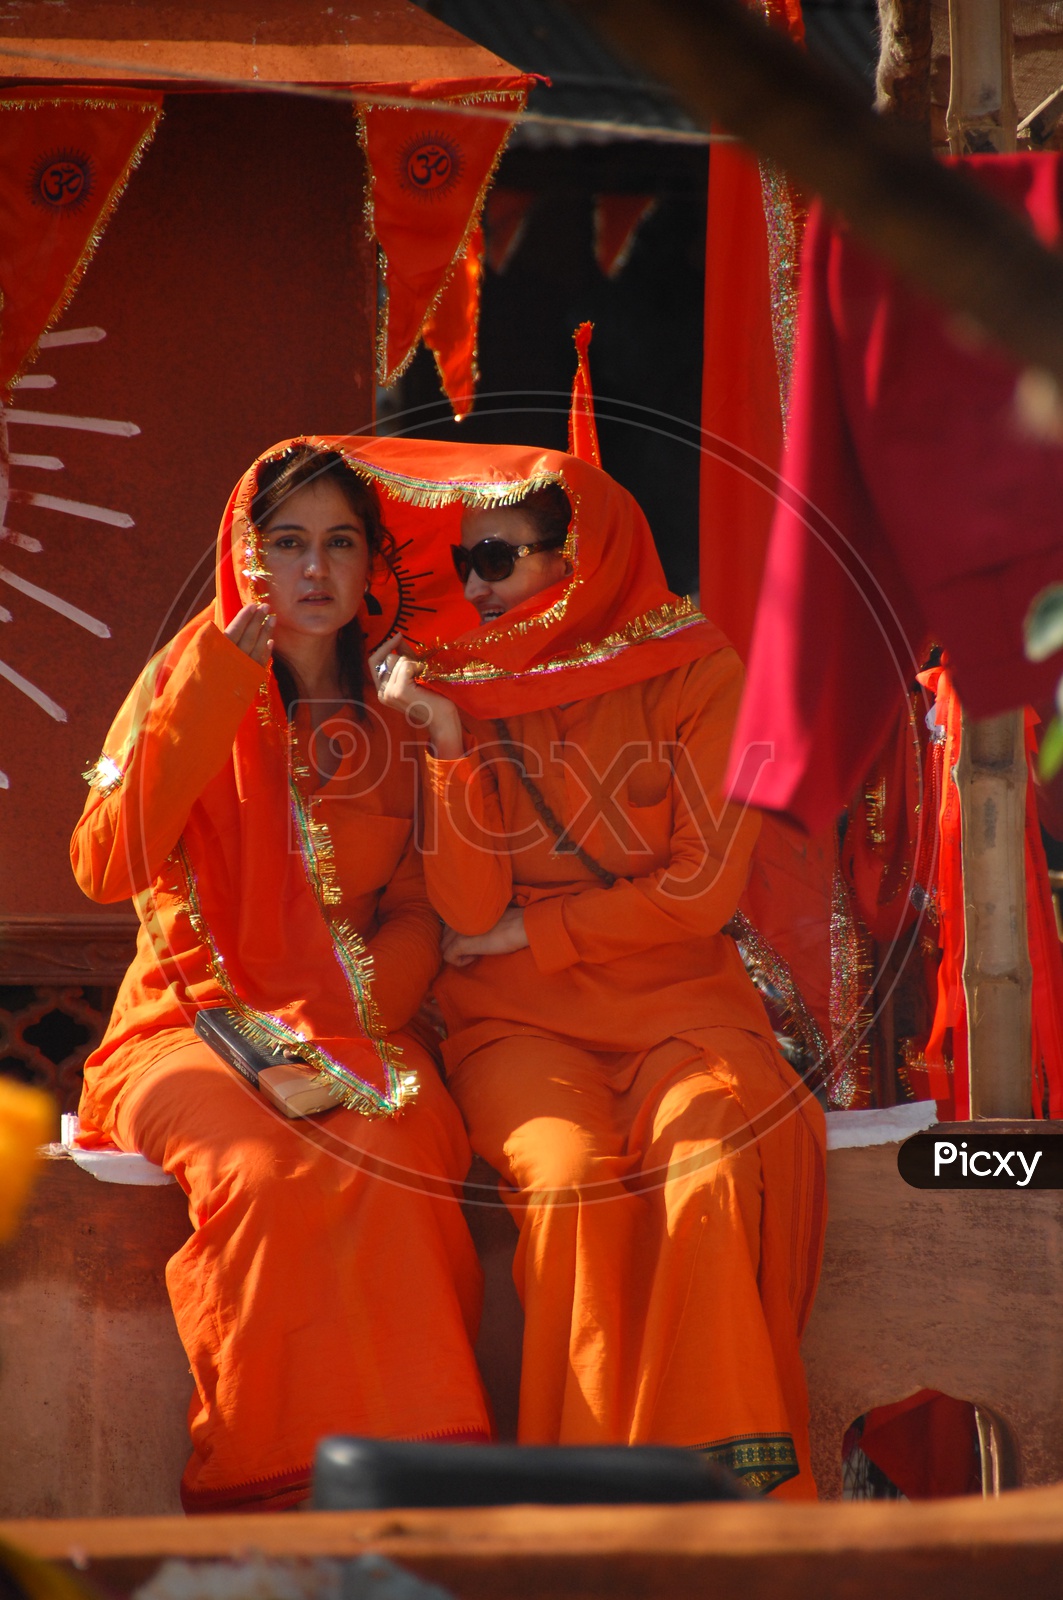 Foreign Woman In Saffron Clothes In India